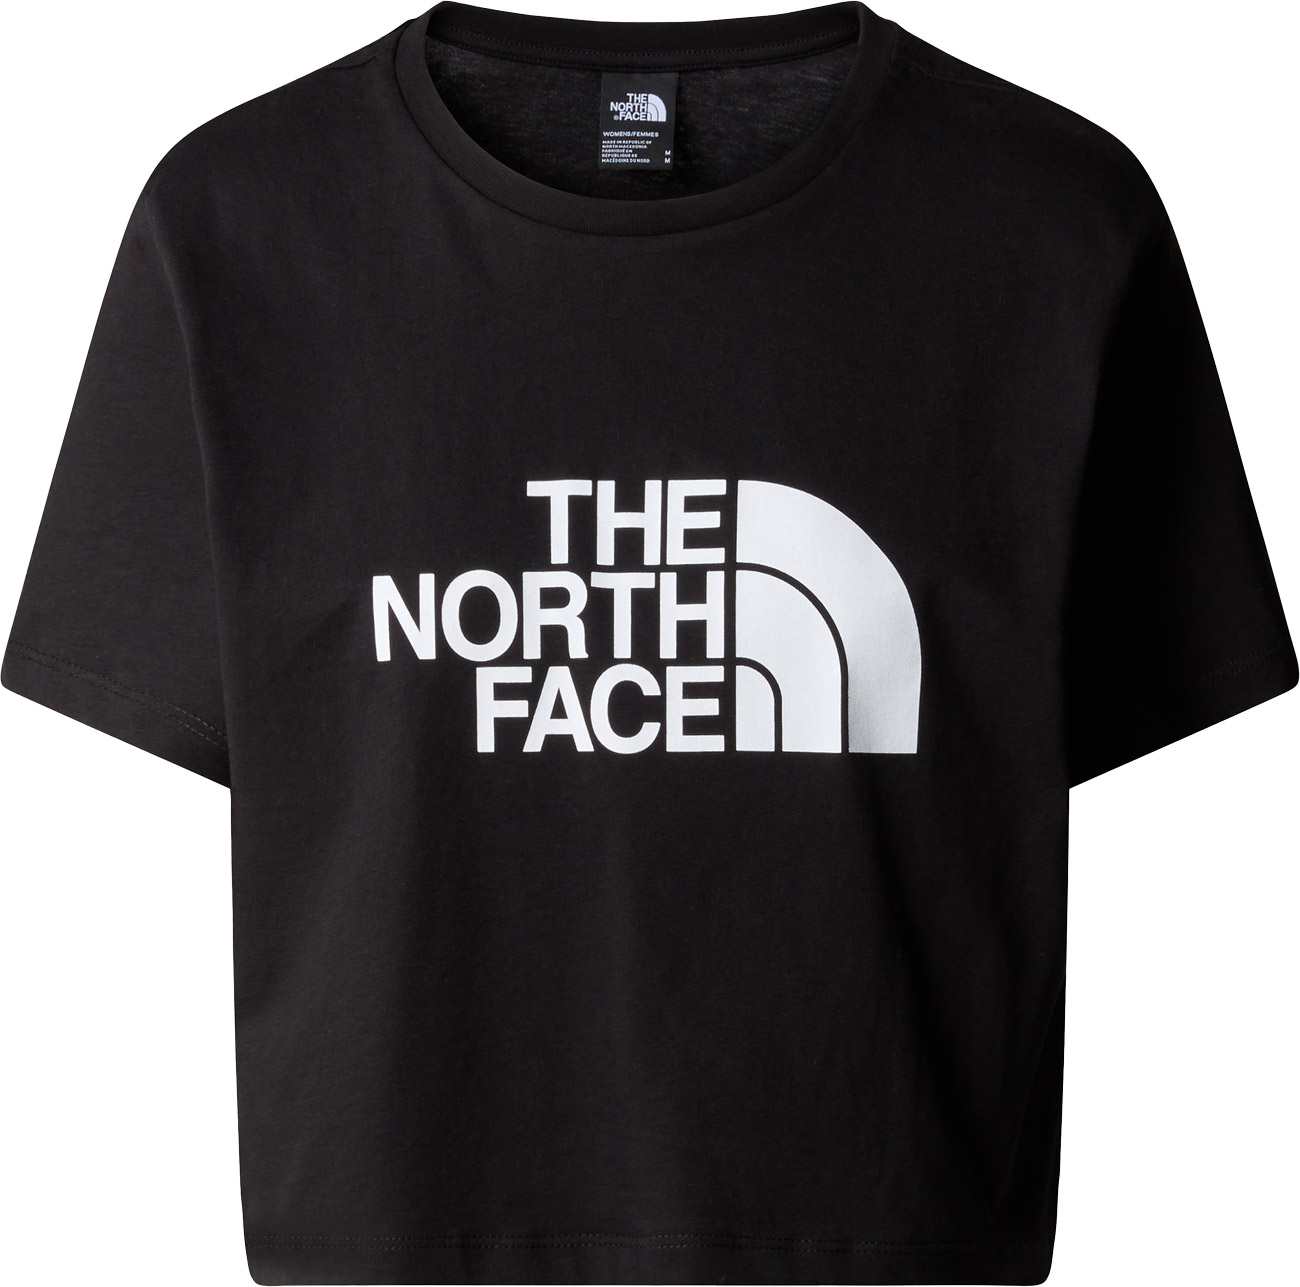 The North Face Damen T-Shirt W's CROPPED EASY von The North Face